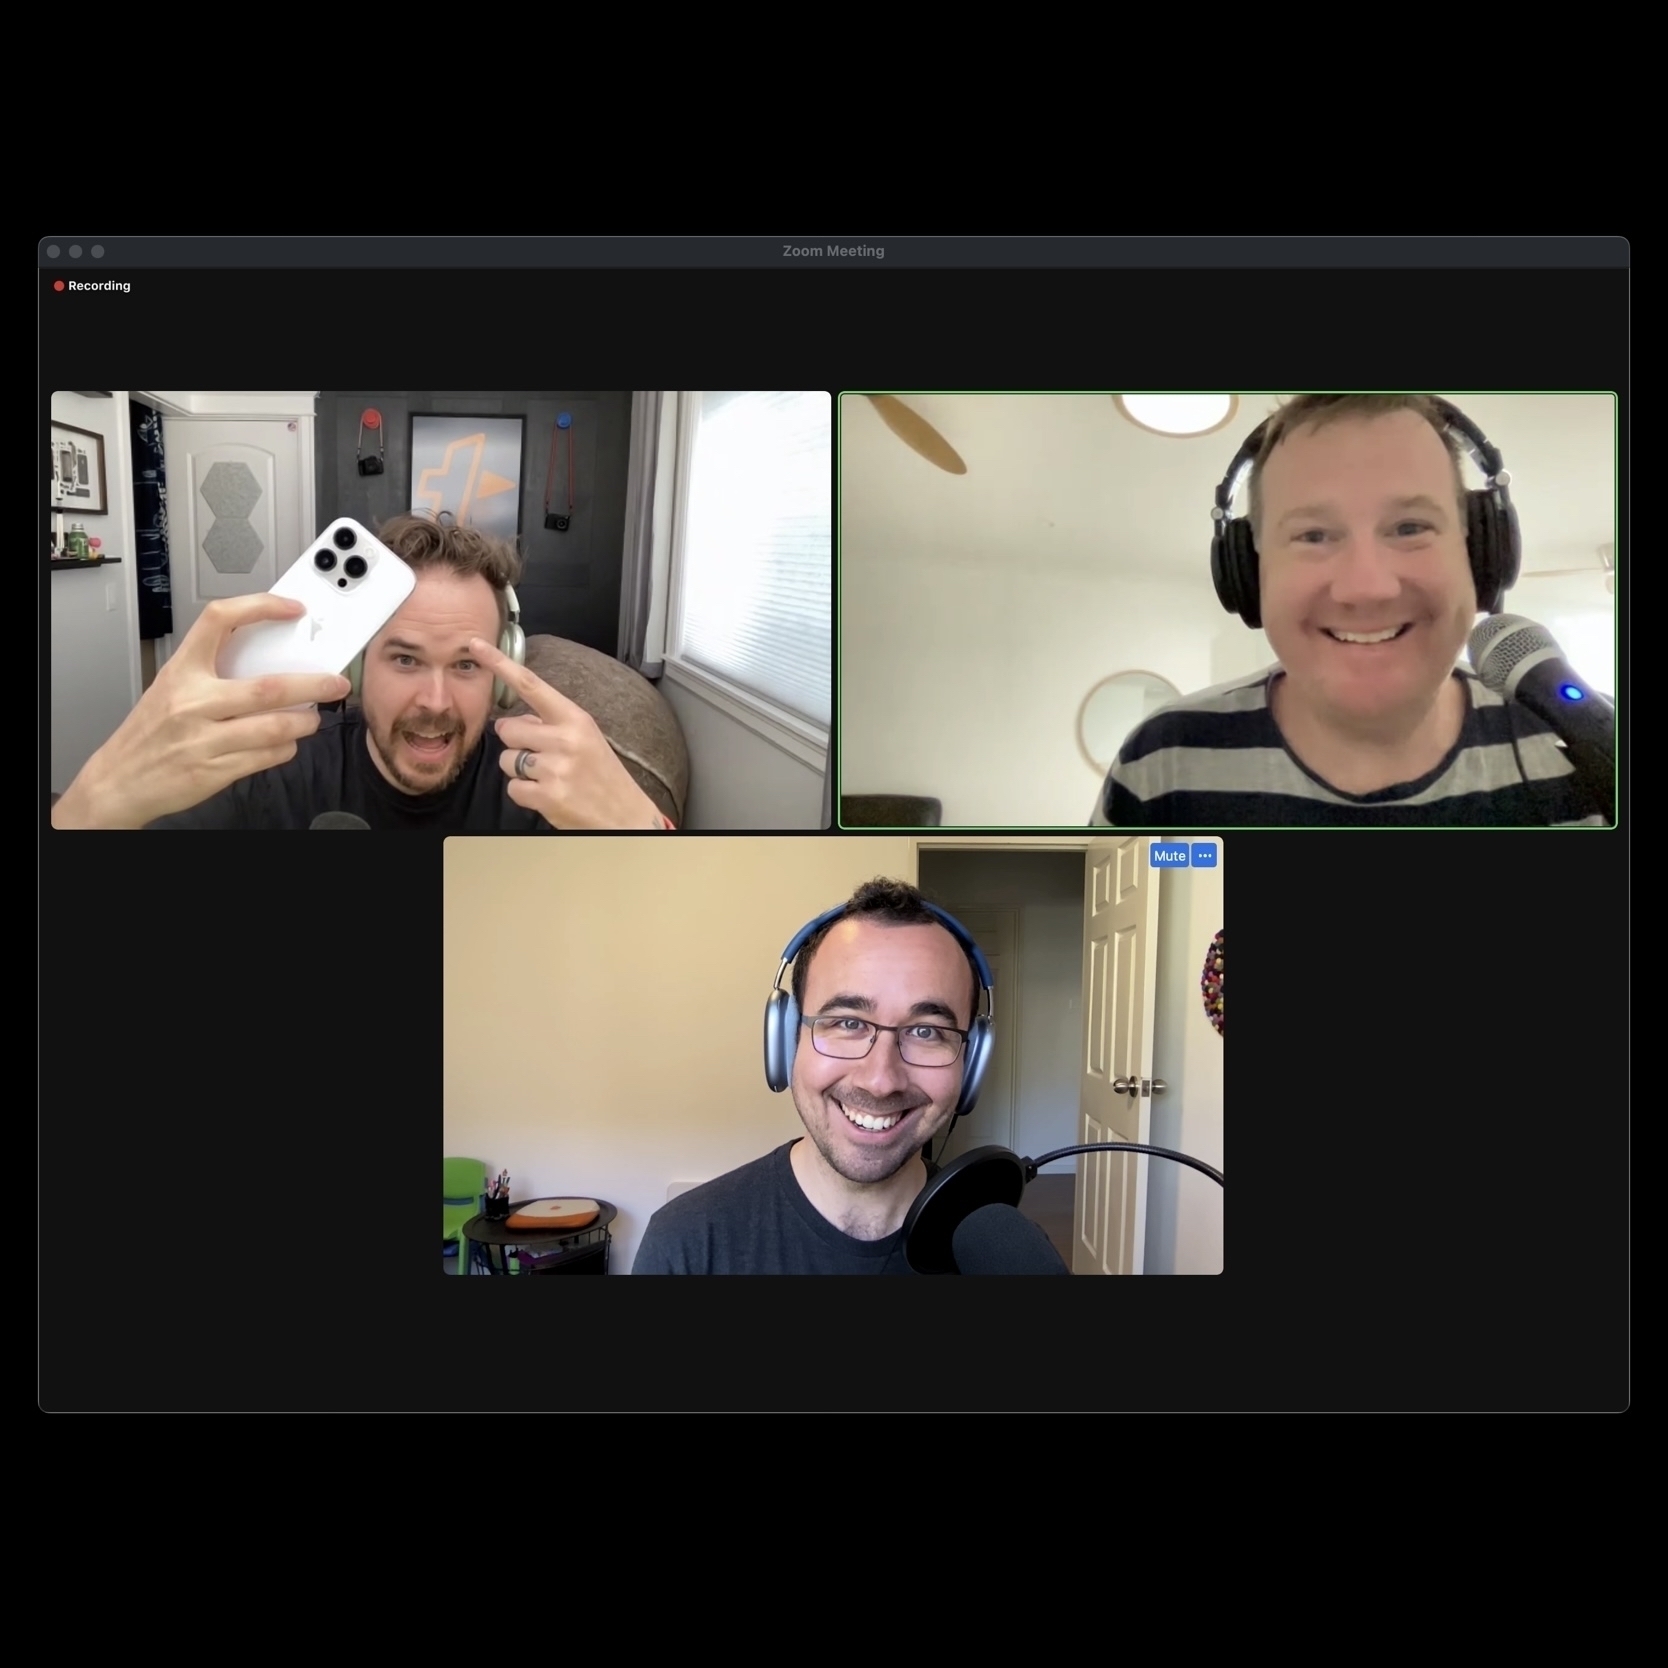 Three smiling hosts in separate Zoom video chat windows, with the top left showing an iPhone.